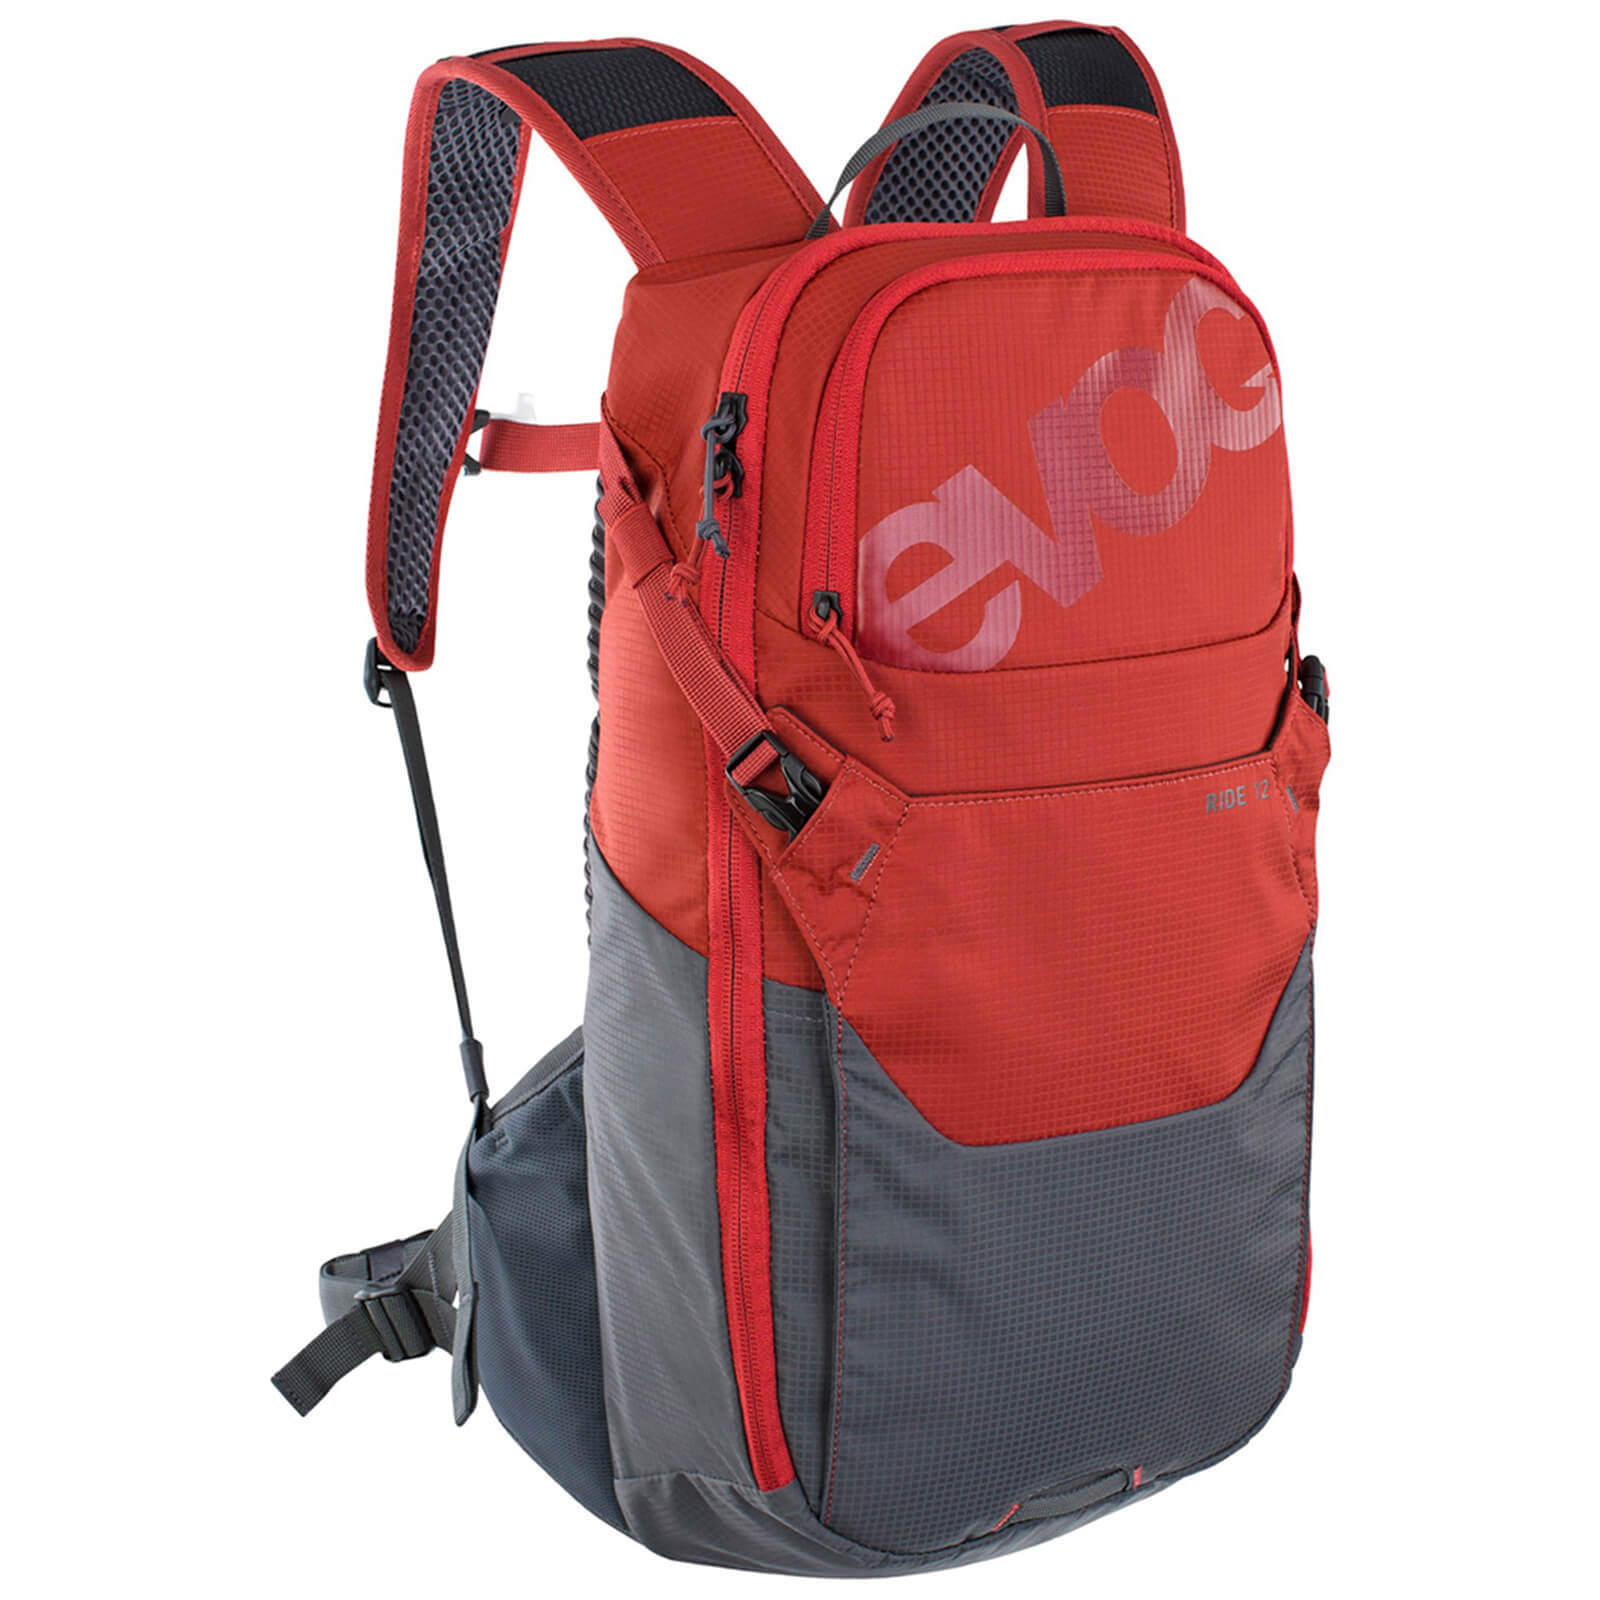 Evoc Ride 12L Performance Backpack - Chili Red/Carbon Grey